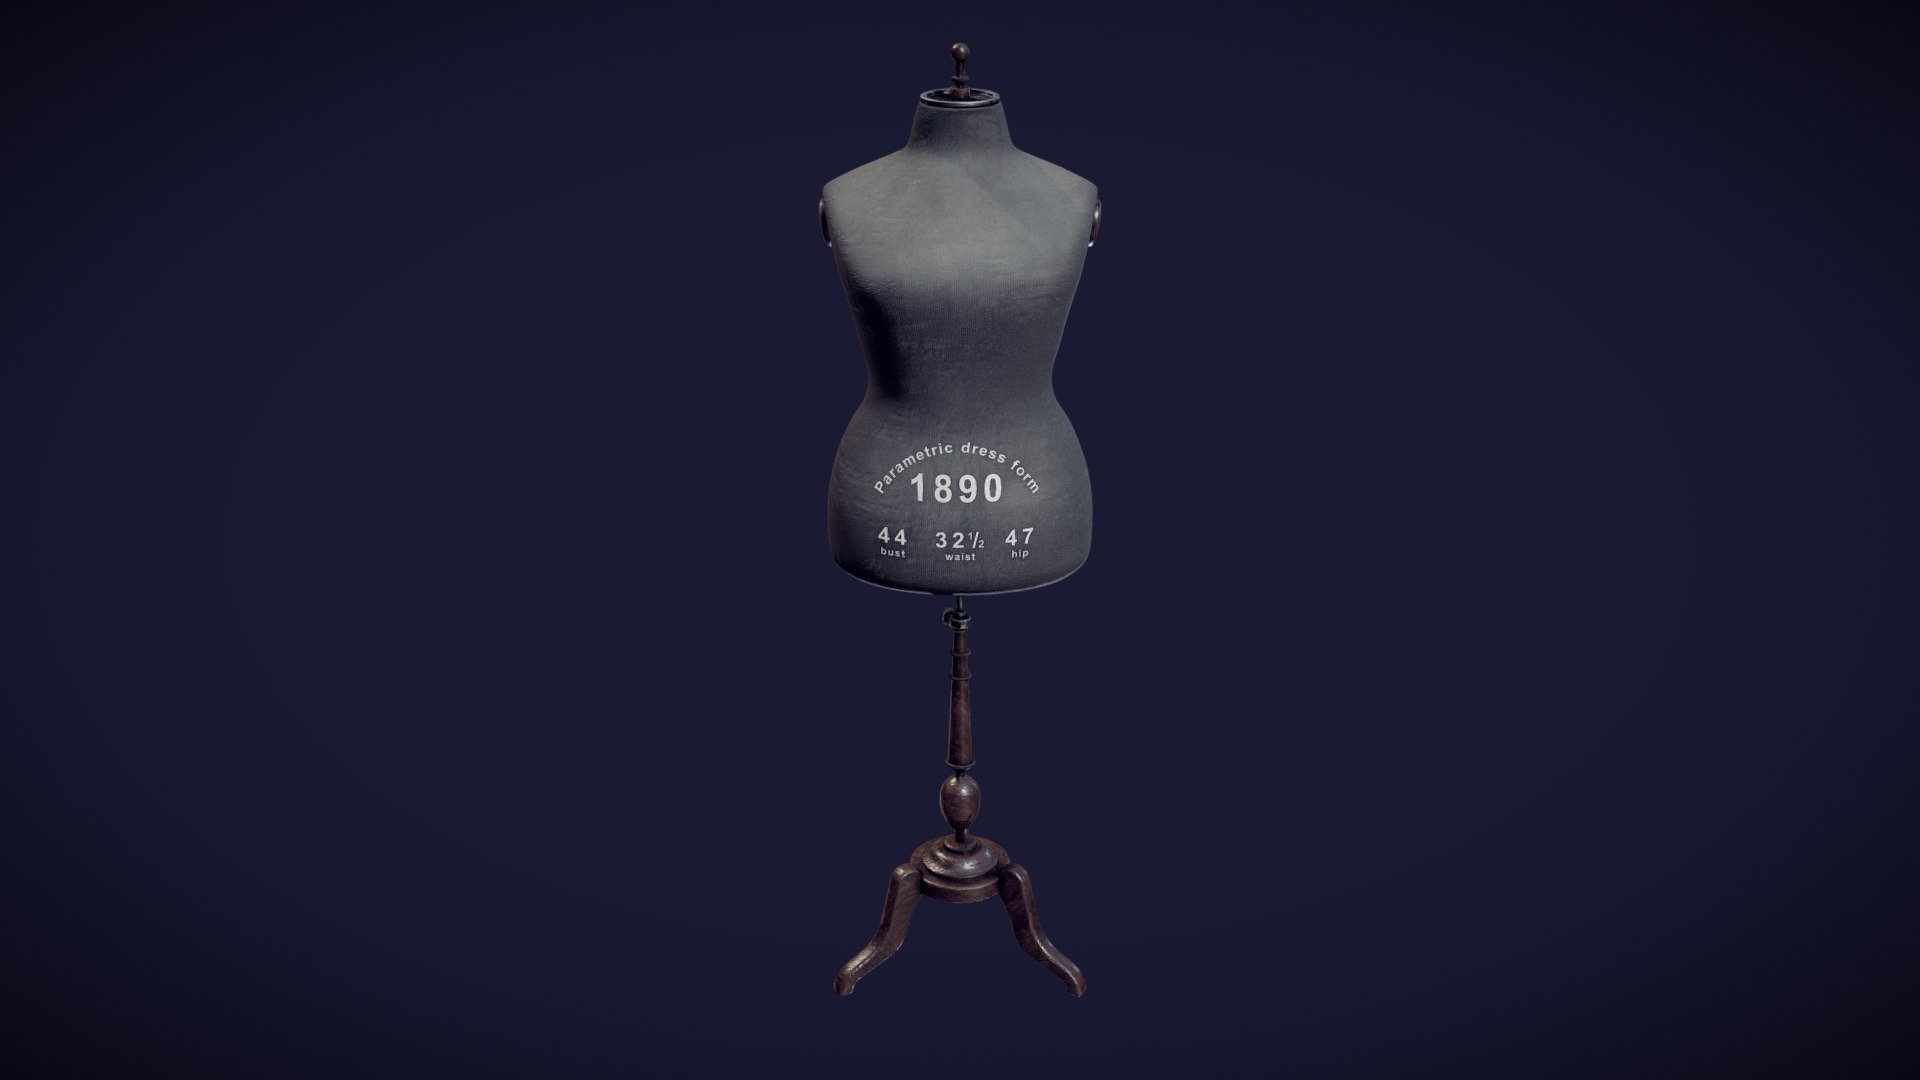 The 3D model presents a historical mannequin (a dress form) dating to 1890. The virtual mannequin was generated automatically by using a new method of parametric modelling (for further details see https://doi.org/10.1108/IJCST-06-2019-0093). The values of body measurements were taken from a sizing table published in “The Cutters Practical Guide to the Cutting of Ladies’ Garments” (V.D.F. Vincent, 1890). The measurements of the mannequin are: bust – 44 inches; waist – 35.5 inches; hip – 47 inches. The authors of the 3D model are

Aleksei Moskvin https://independent.academia.edu/AlekseiMoskvin

Mariia Moskvina https://independent.academia.edu/MariiaMoskvina

(Saint Petersburg State University of Industrial Technologies and Design)

DOI: http://dx.doi.org/10.13140/RG.2.2.17521.81768
https://www.researchgate.net/publication/357168648_1890_dress_form_size_44

The authors thank scientists from Ivanovo State Polytechnic University for providing information on historical mannequins 3d model